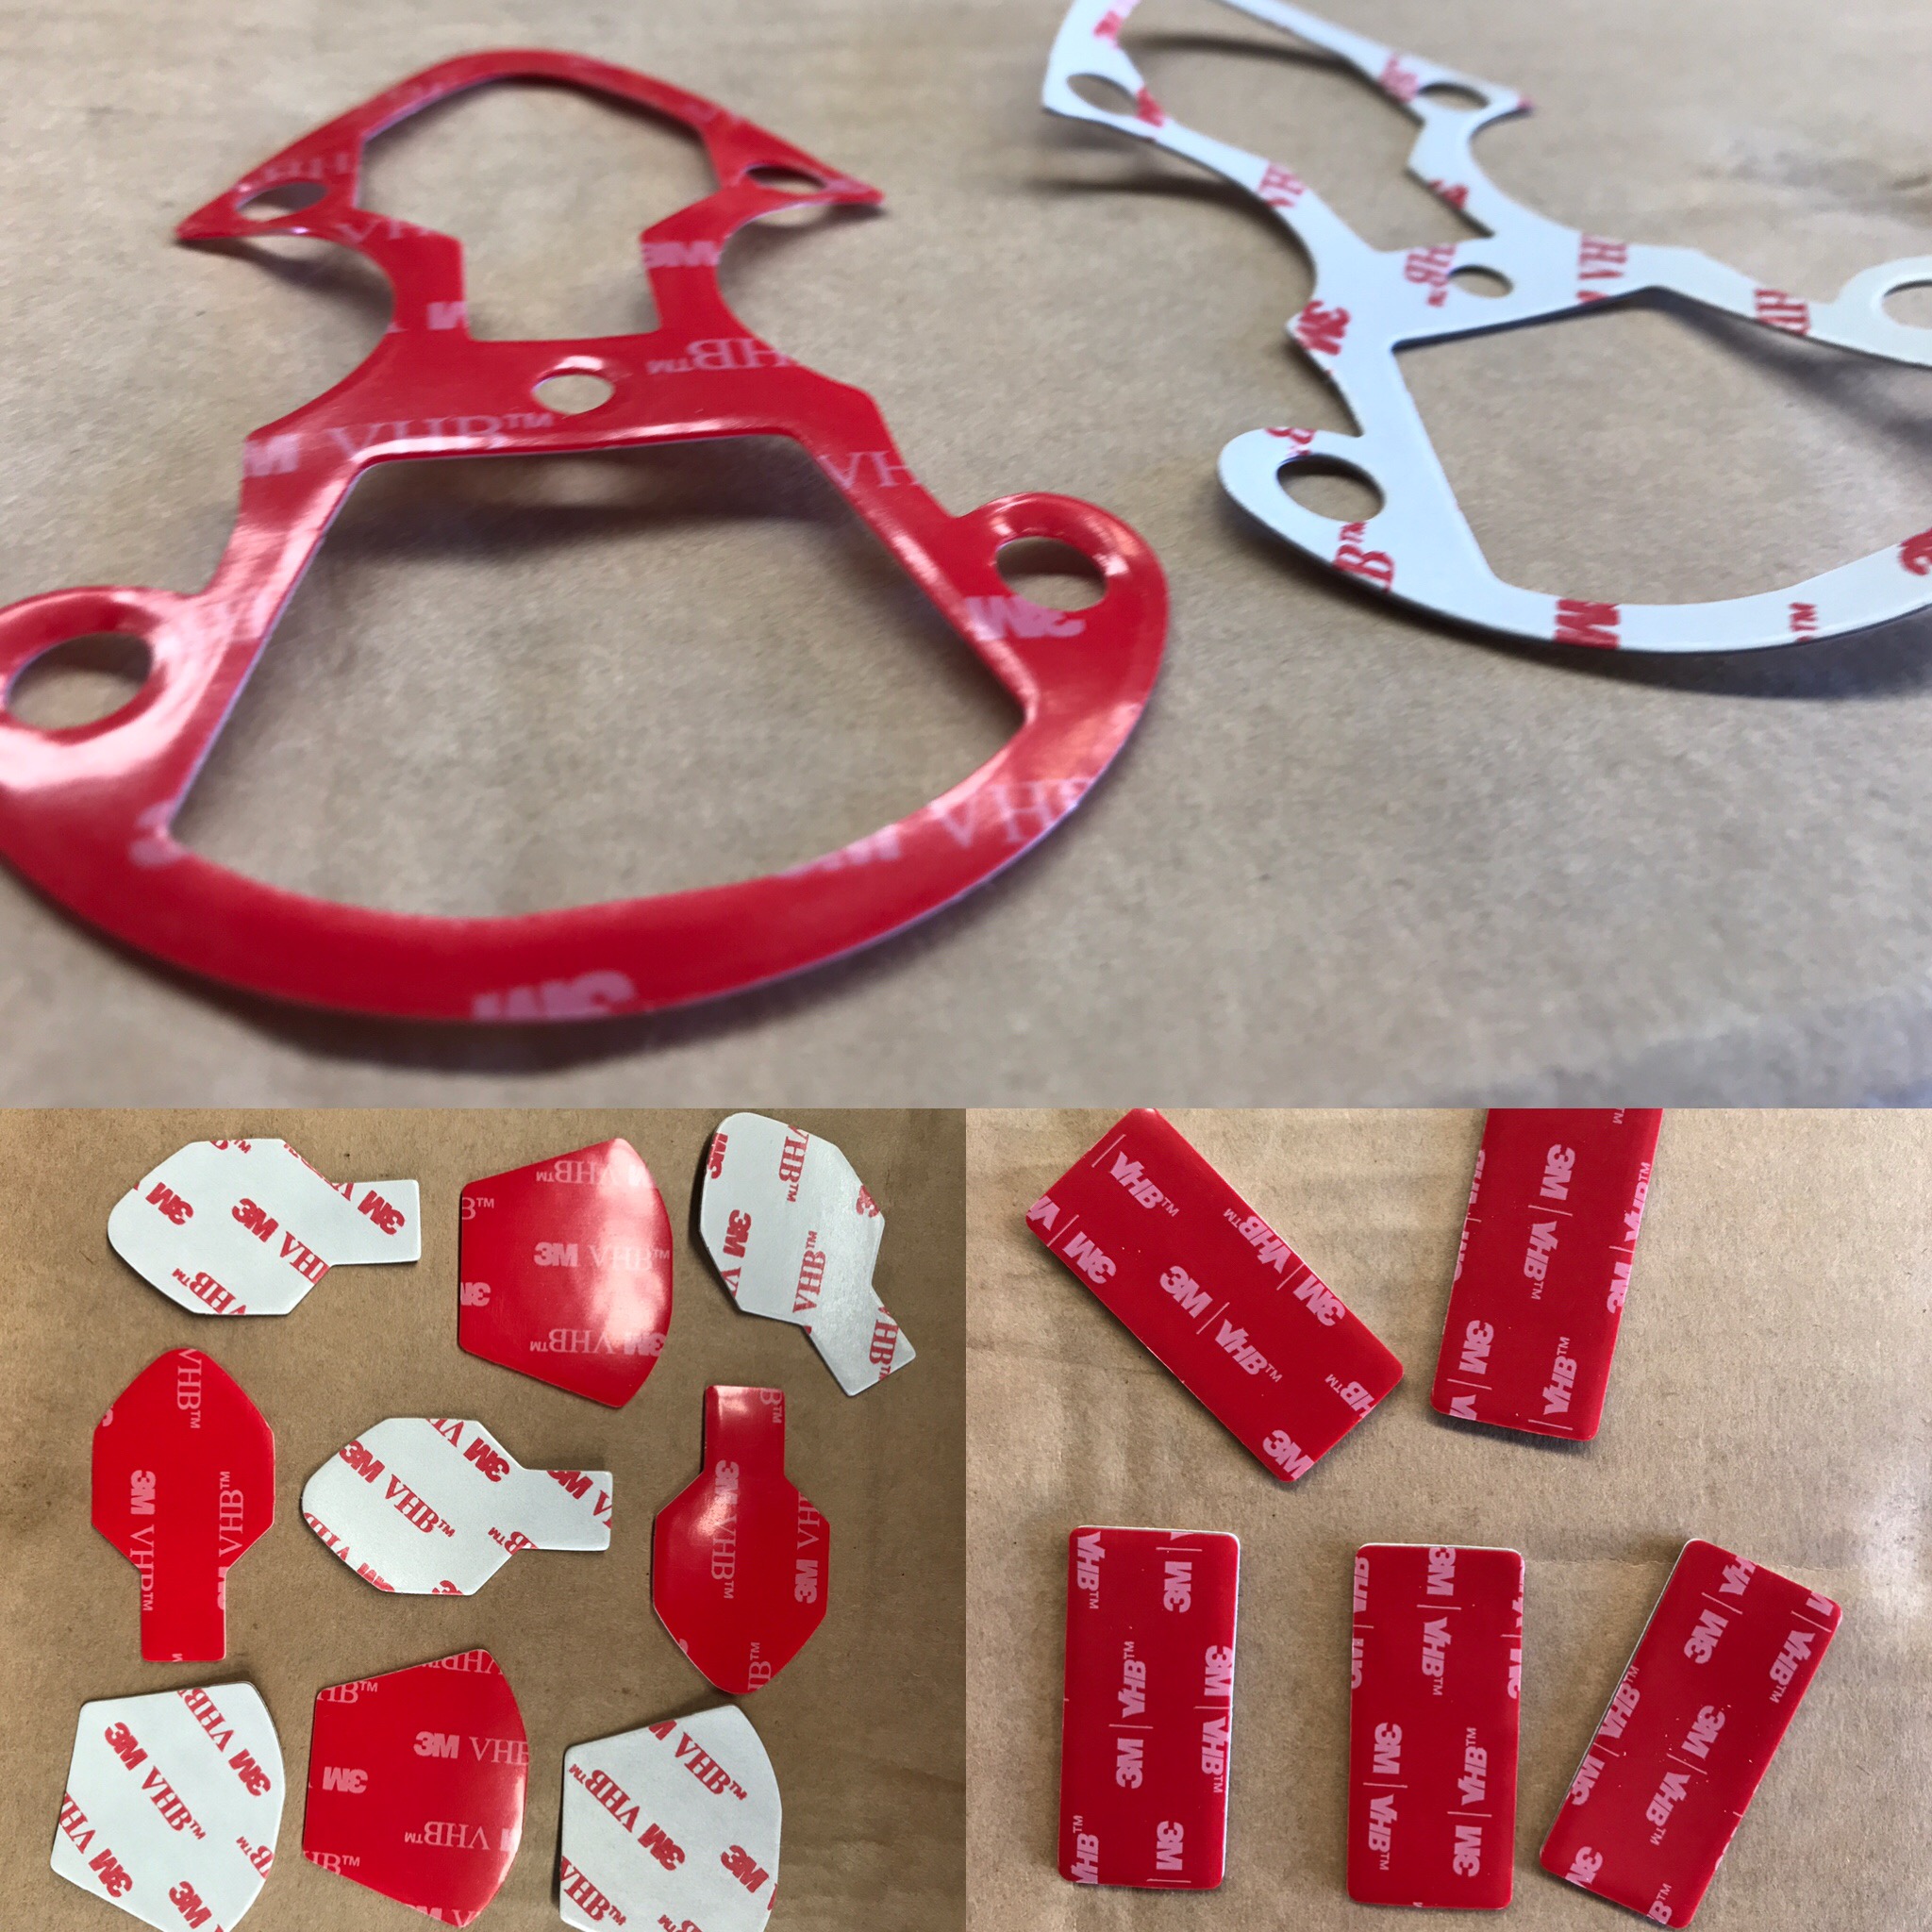 We Die Cut Custom Size Shapes, Gaskets, Washers out of all types of Adhesive Tapes